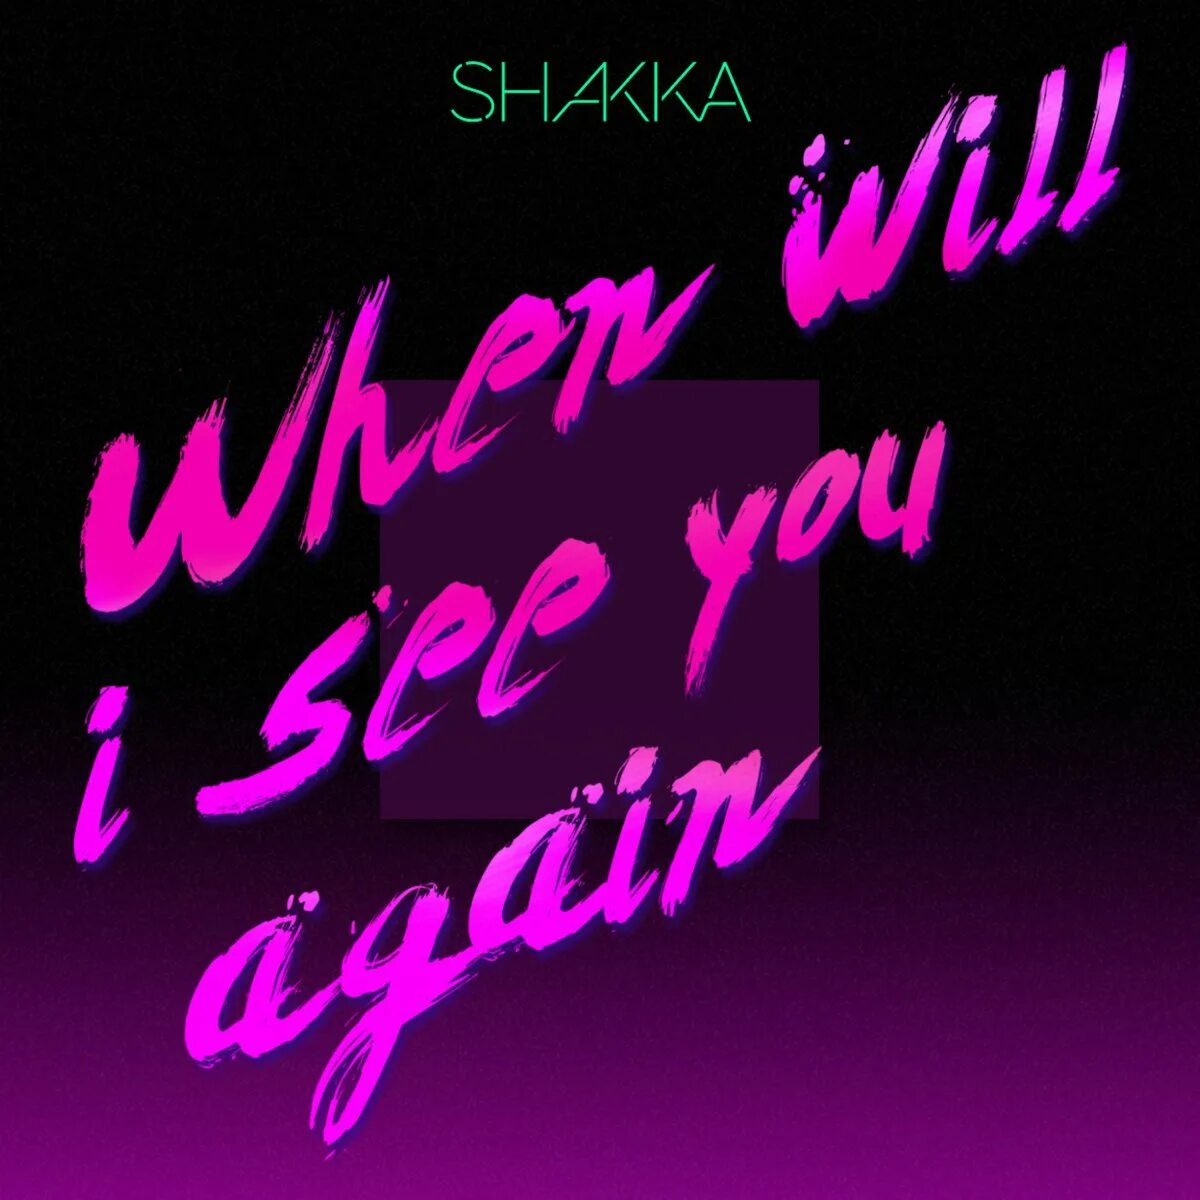 Do you see again. When will i see you again. When will i see you again Shakka. When will i see you again by Shakka (Sped up). See you when i see you.